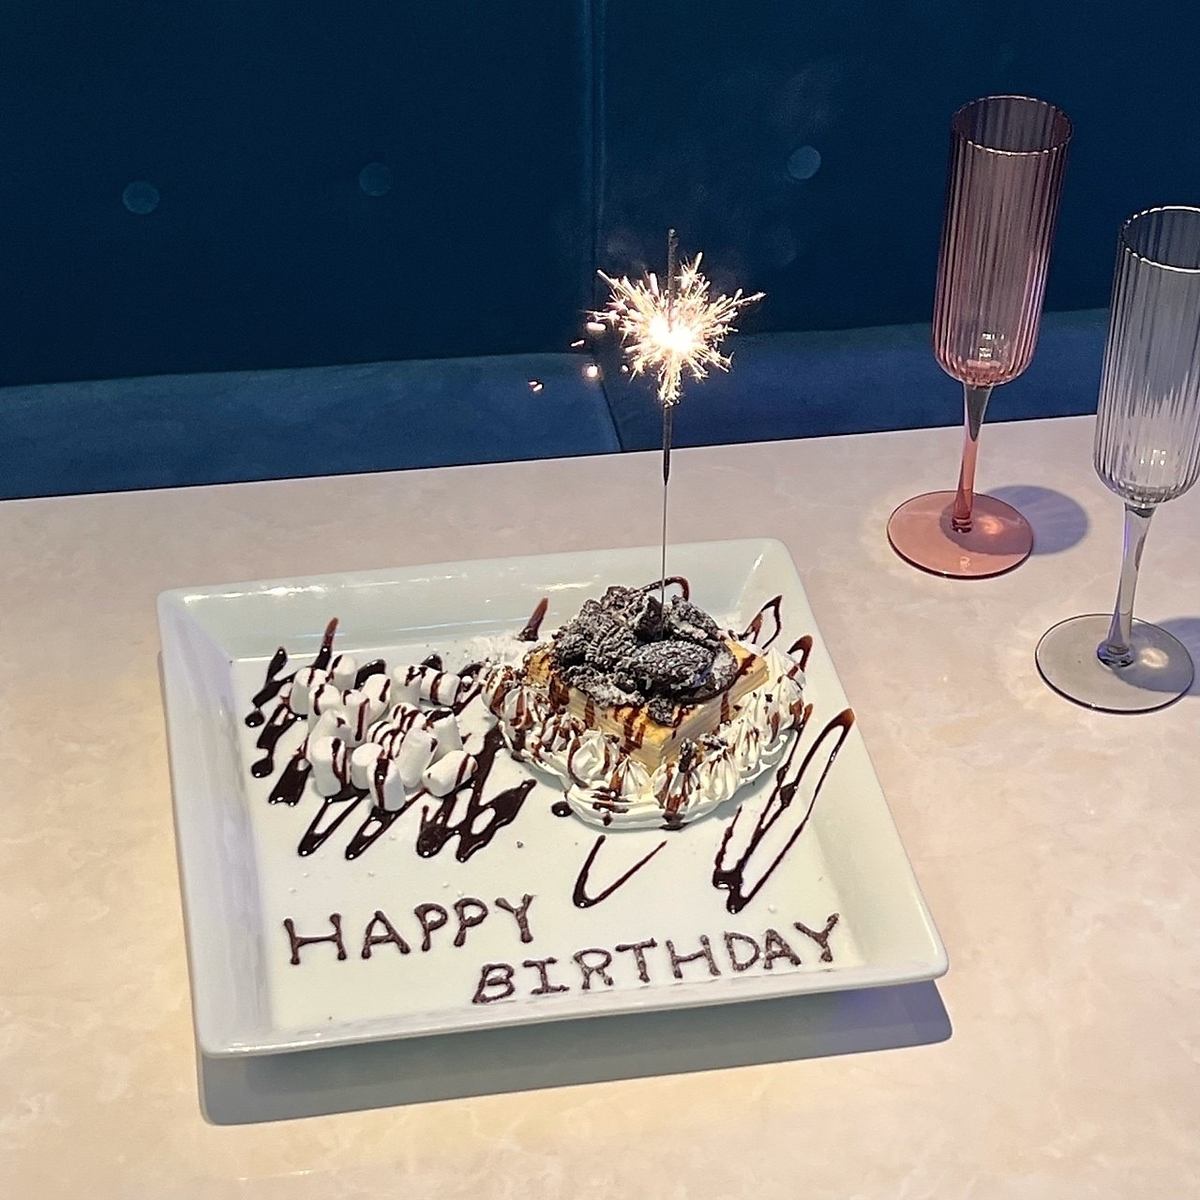 5 major birthday benefits available★An unforgettable surprise at a Korean-style cafe♪